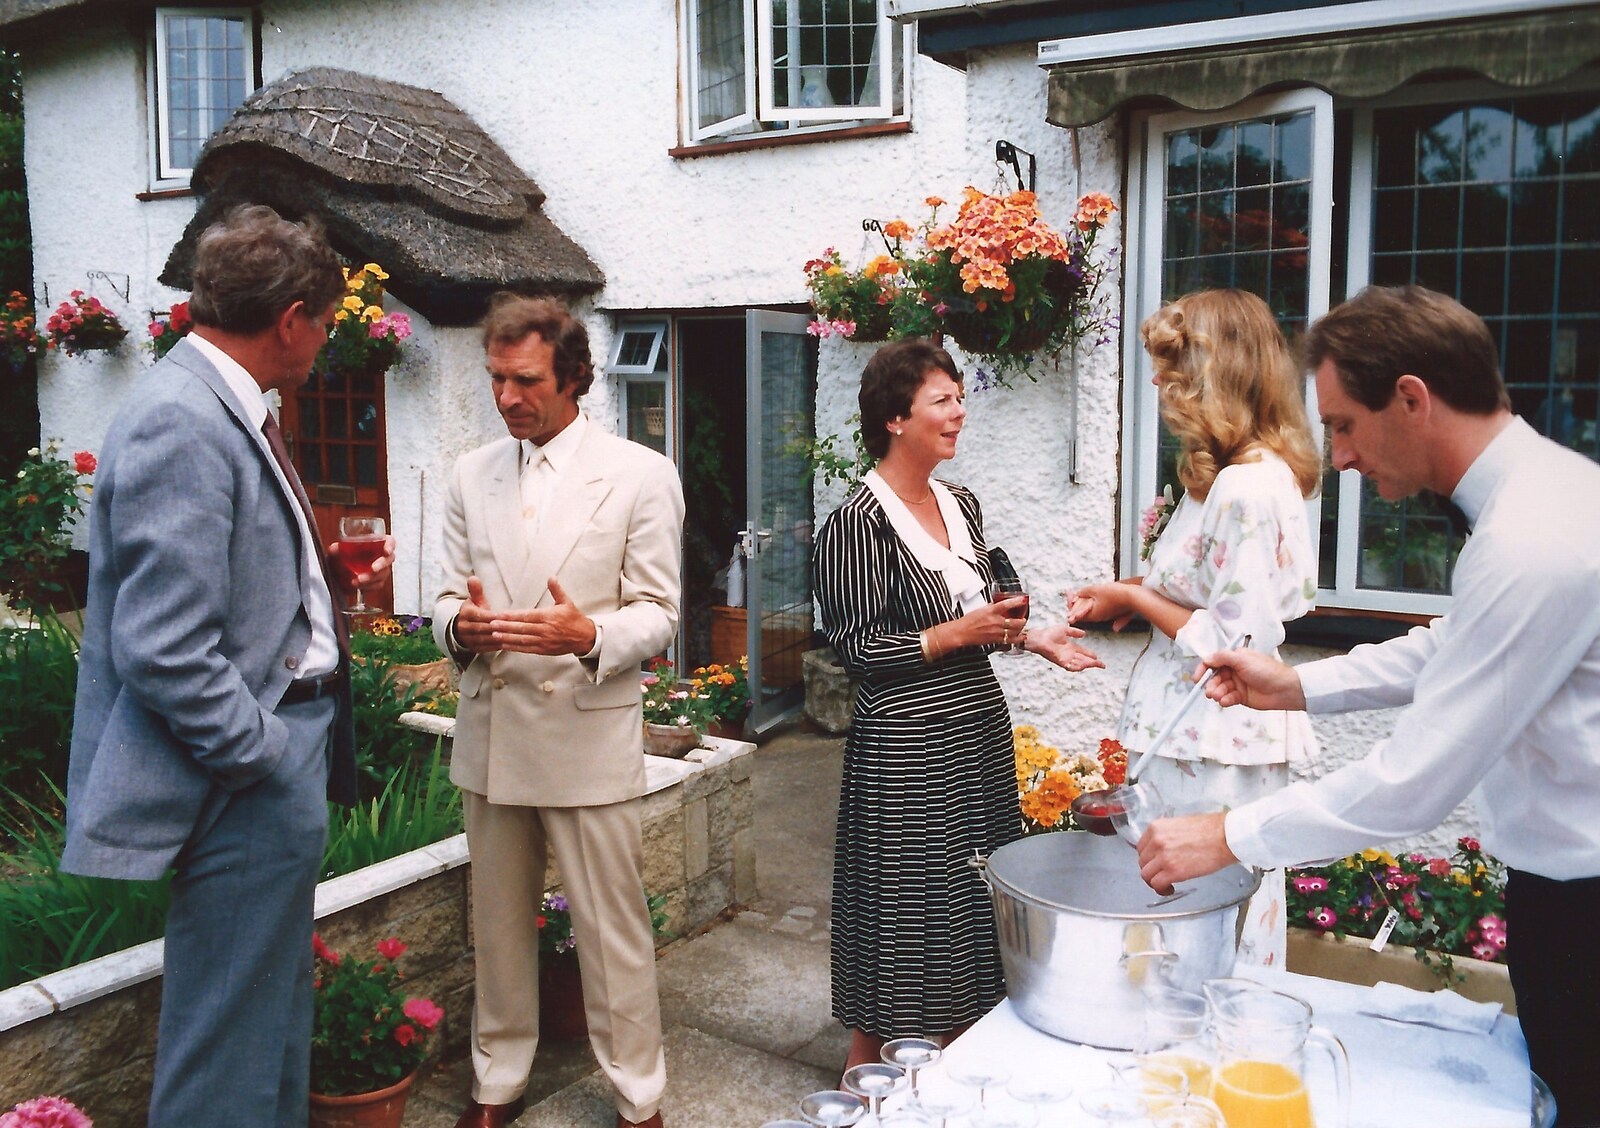 Kir Royale is served as Mother and Mike chat from Mother and Mike's Wedding Reception, Bransgore, Dorset - 20th August 1988